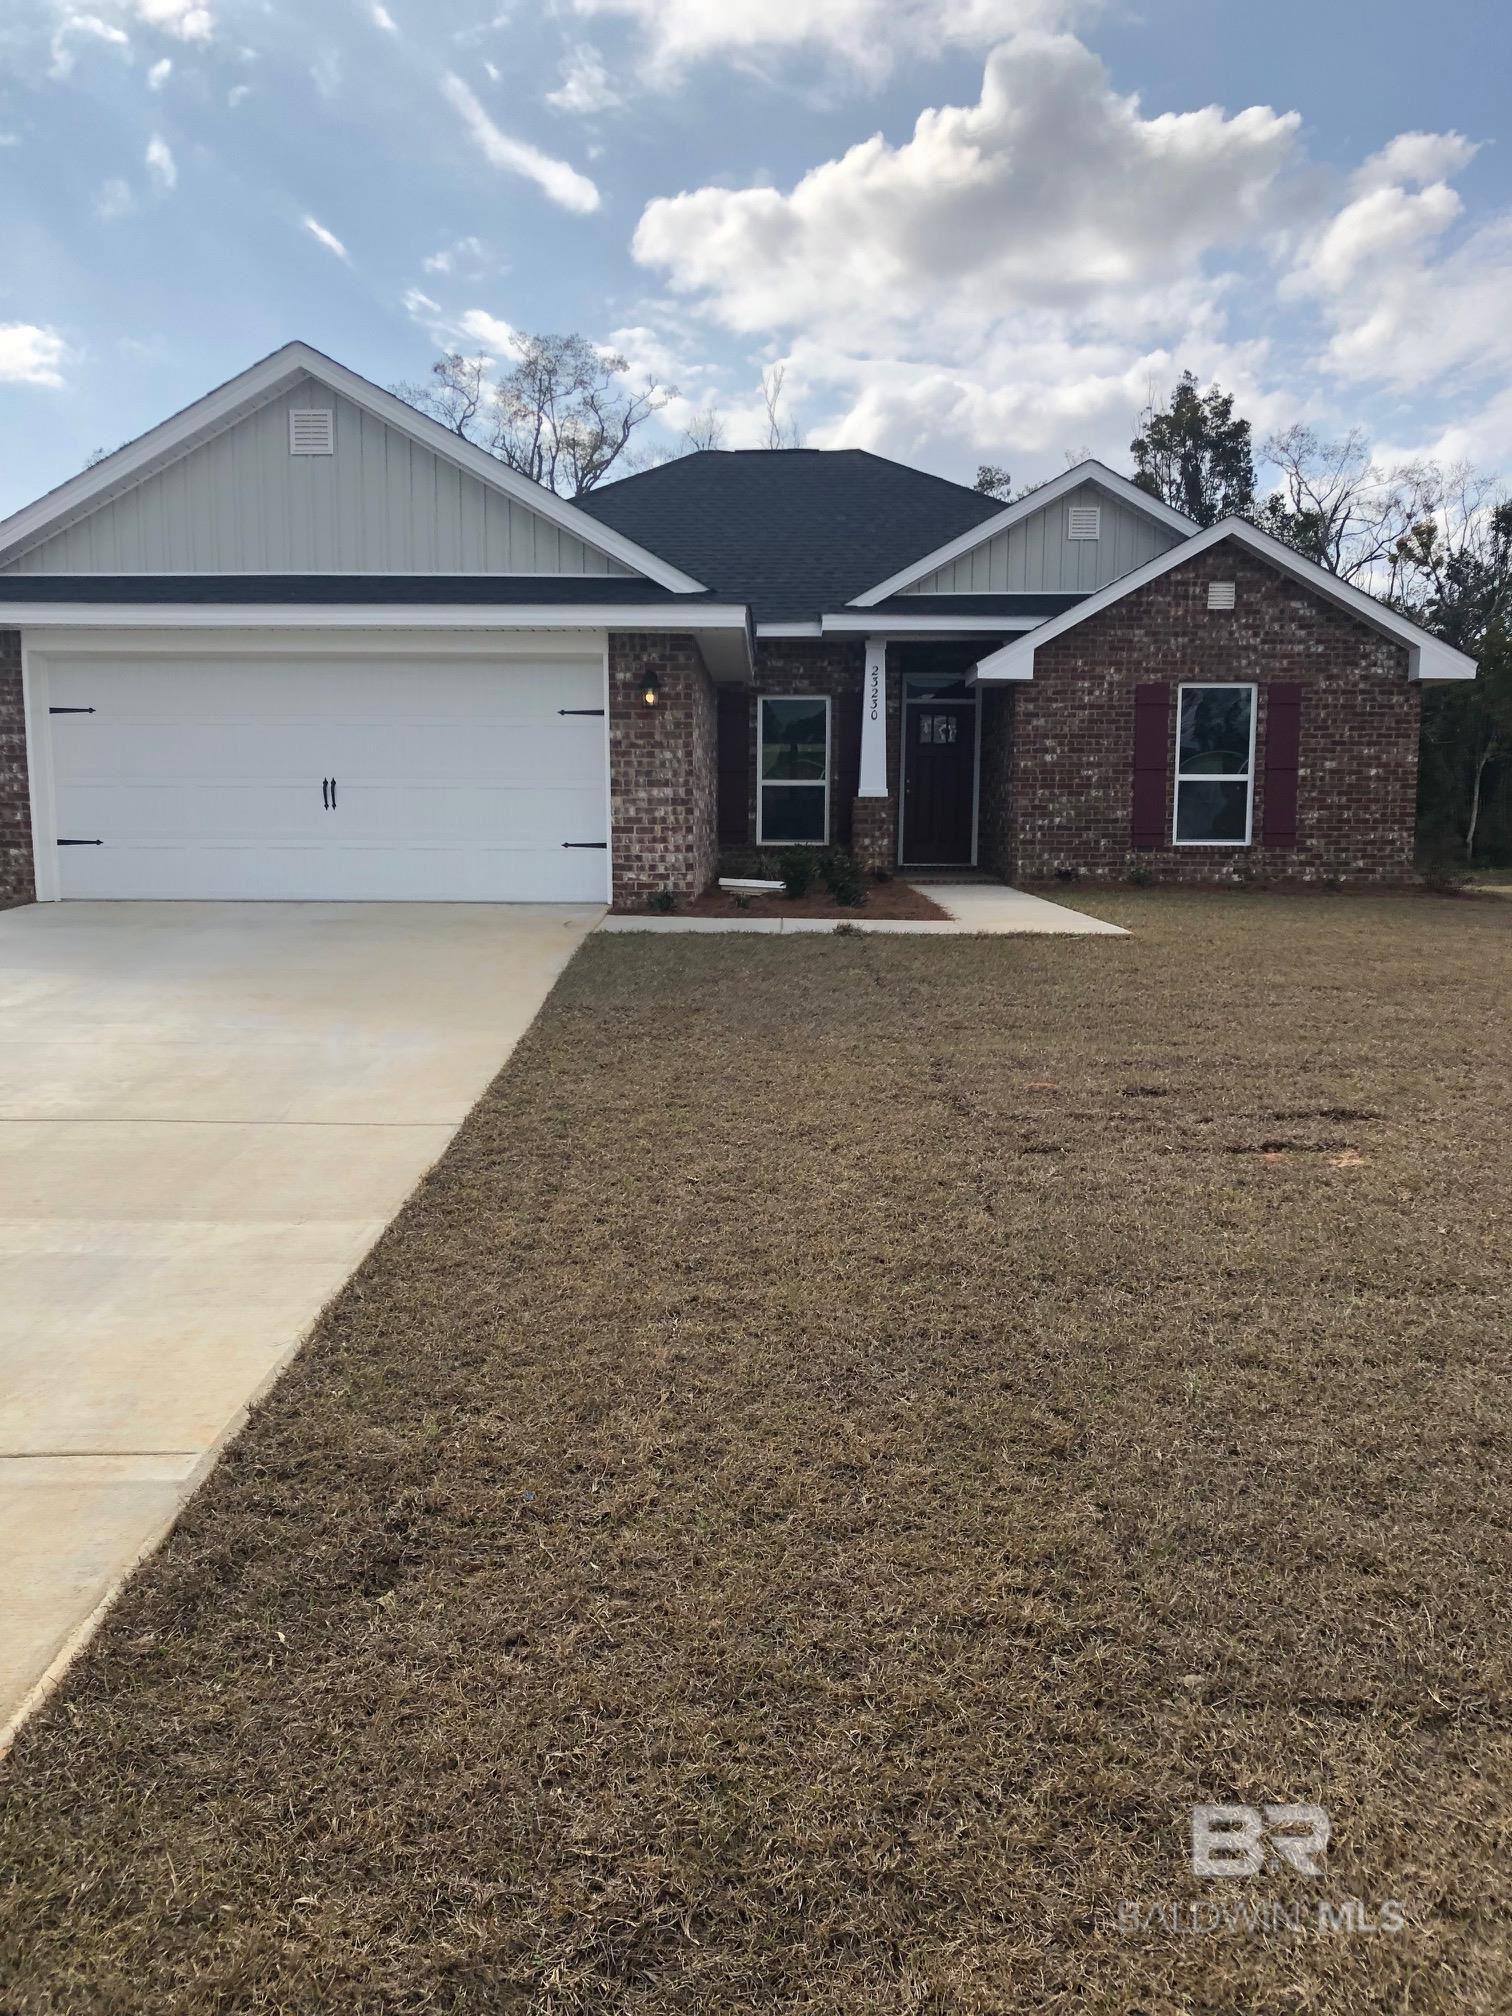 This home offers a split floor plan with 4 bedrooms and 2 baths.  The 4th bedroom would also make a nice study.  The 1665 plan has a very open living area perfect for entertaining or family gatherings.  Enjoy this season in a brand new maintenance free Adams Homes!